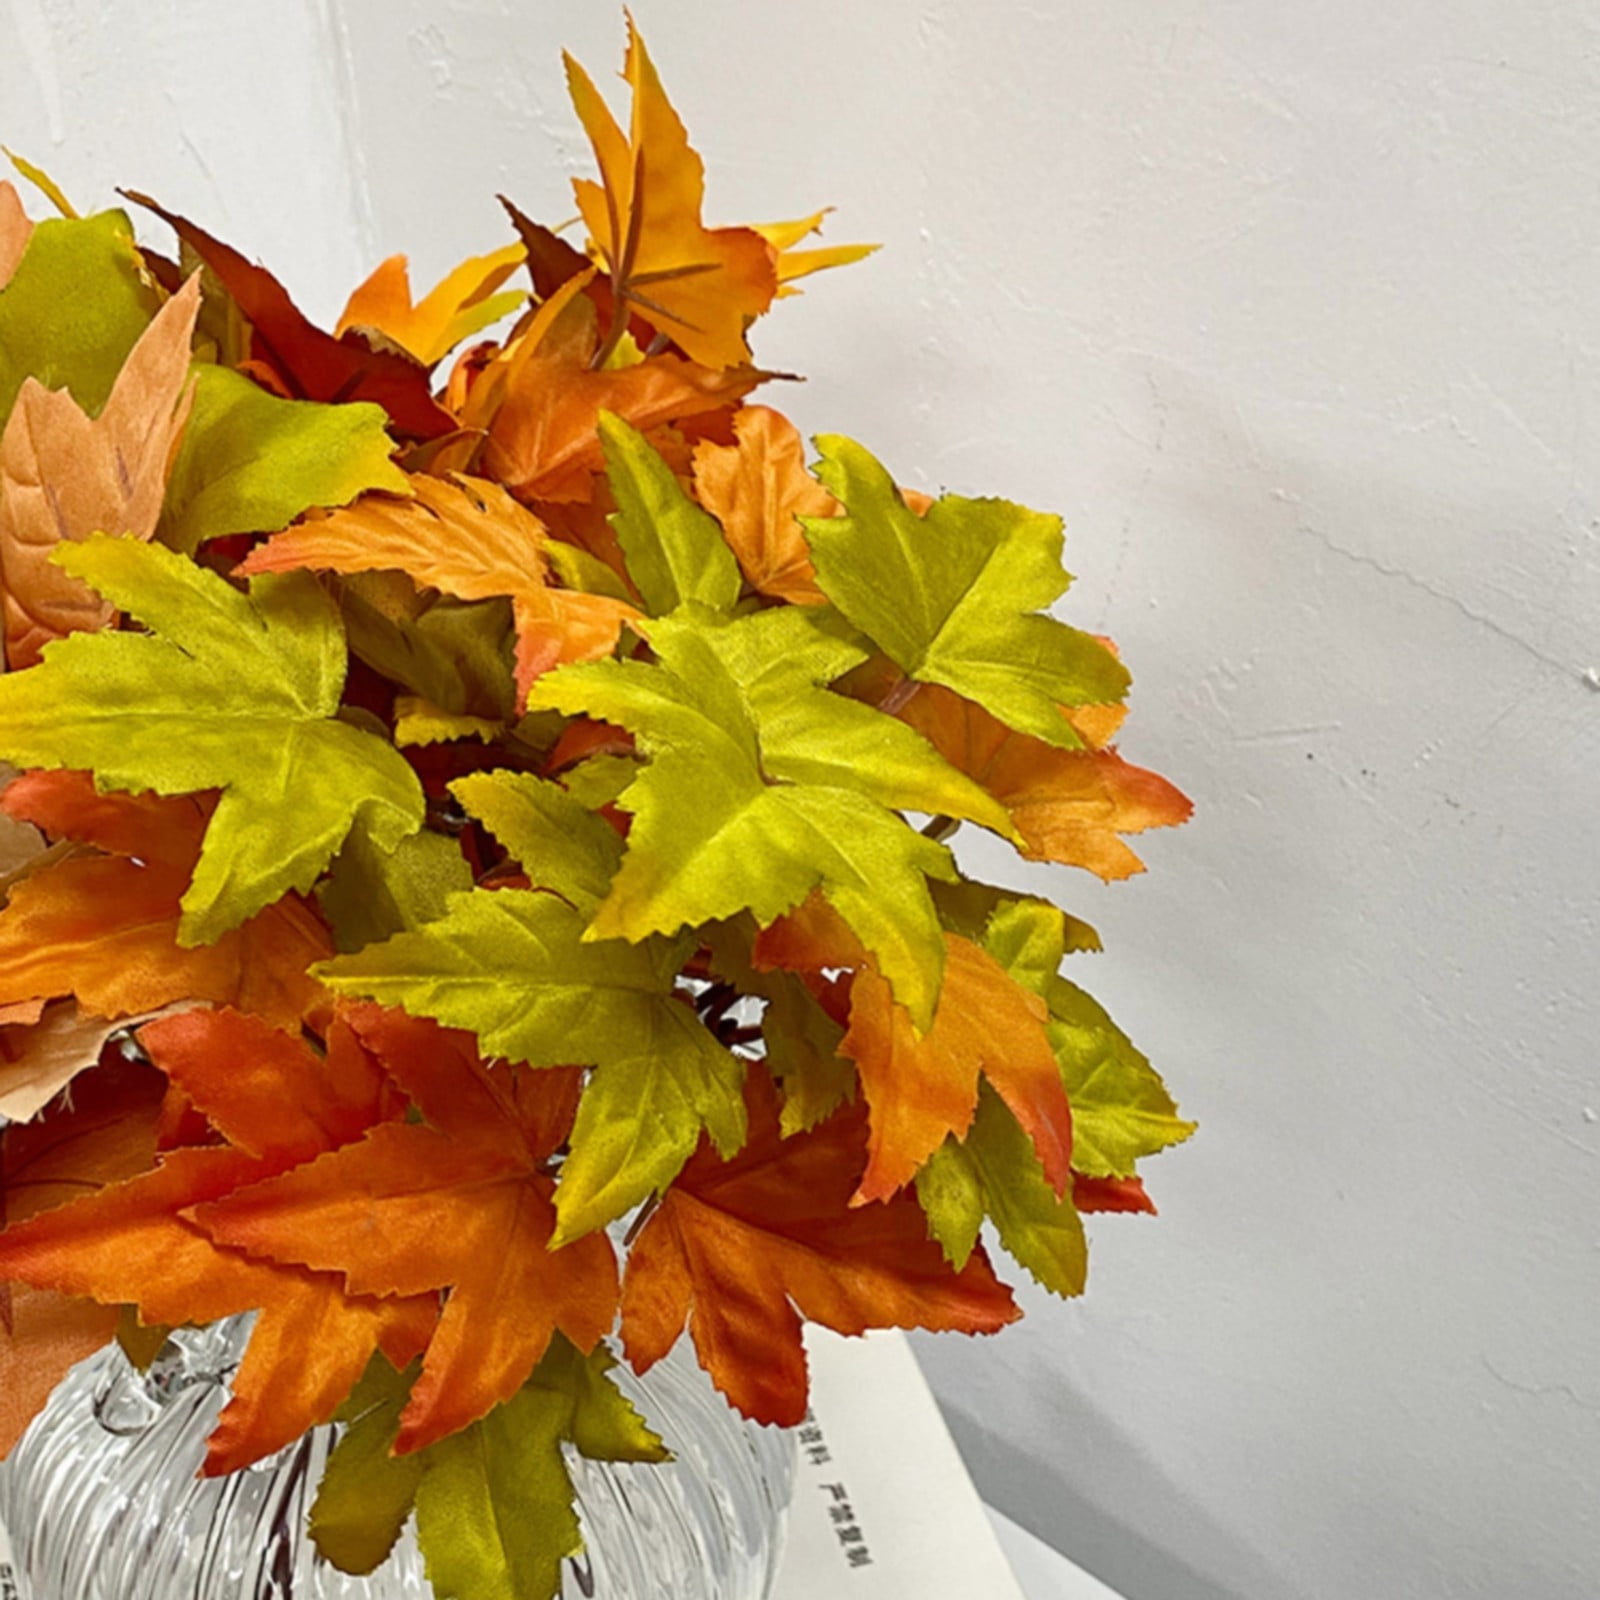 Winter Vase Filler Baskets with Artificial Flowers Maple Leaf Bundle  Thanksgiving Home Decoration Green Cutting Ornaments Autumn Maple Flowers  from